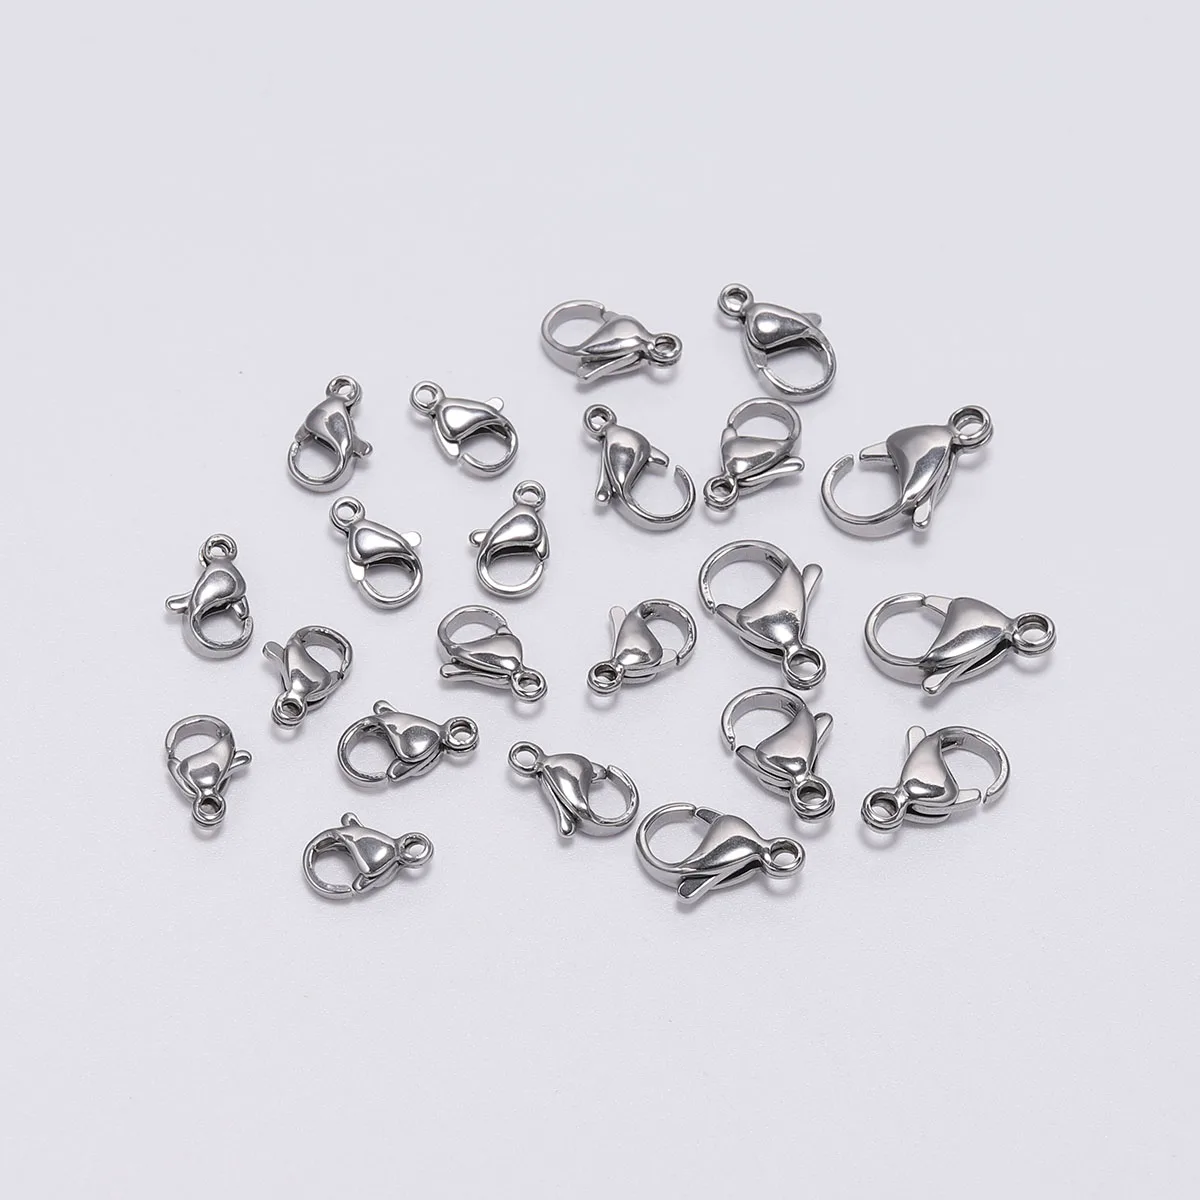 

Crafts Necklace Bracelet Connectors Jewelry Making 30Pcs Stainless Steel End Hooks Charms Lobster Claw Clasp DIY Findings Clasps